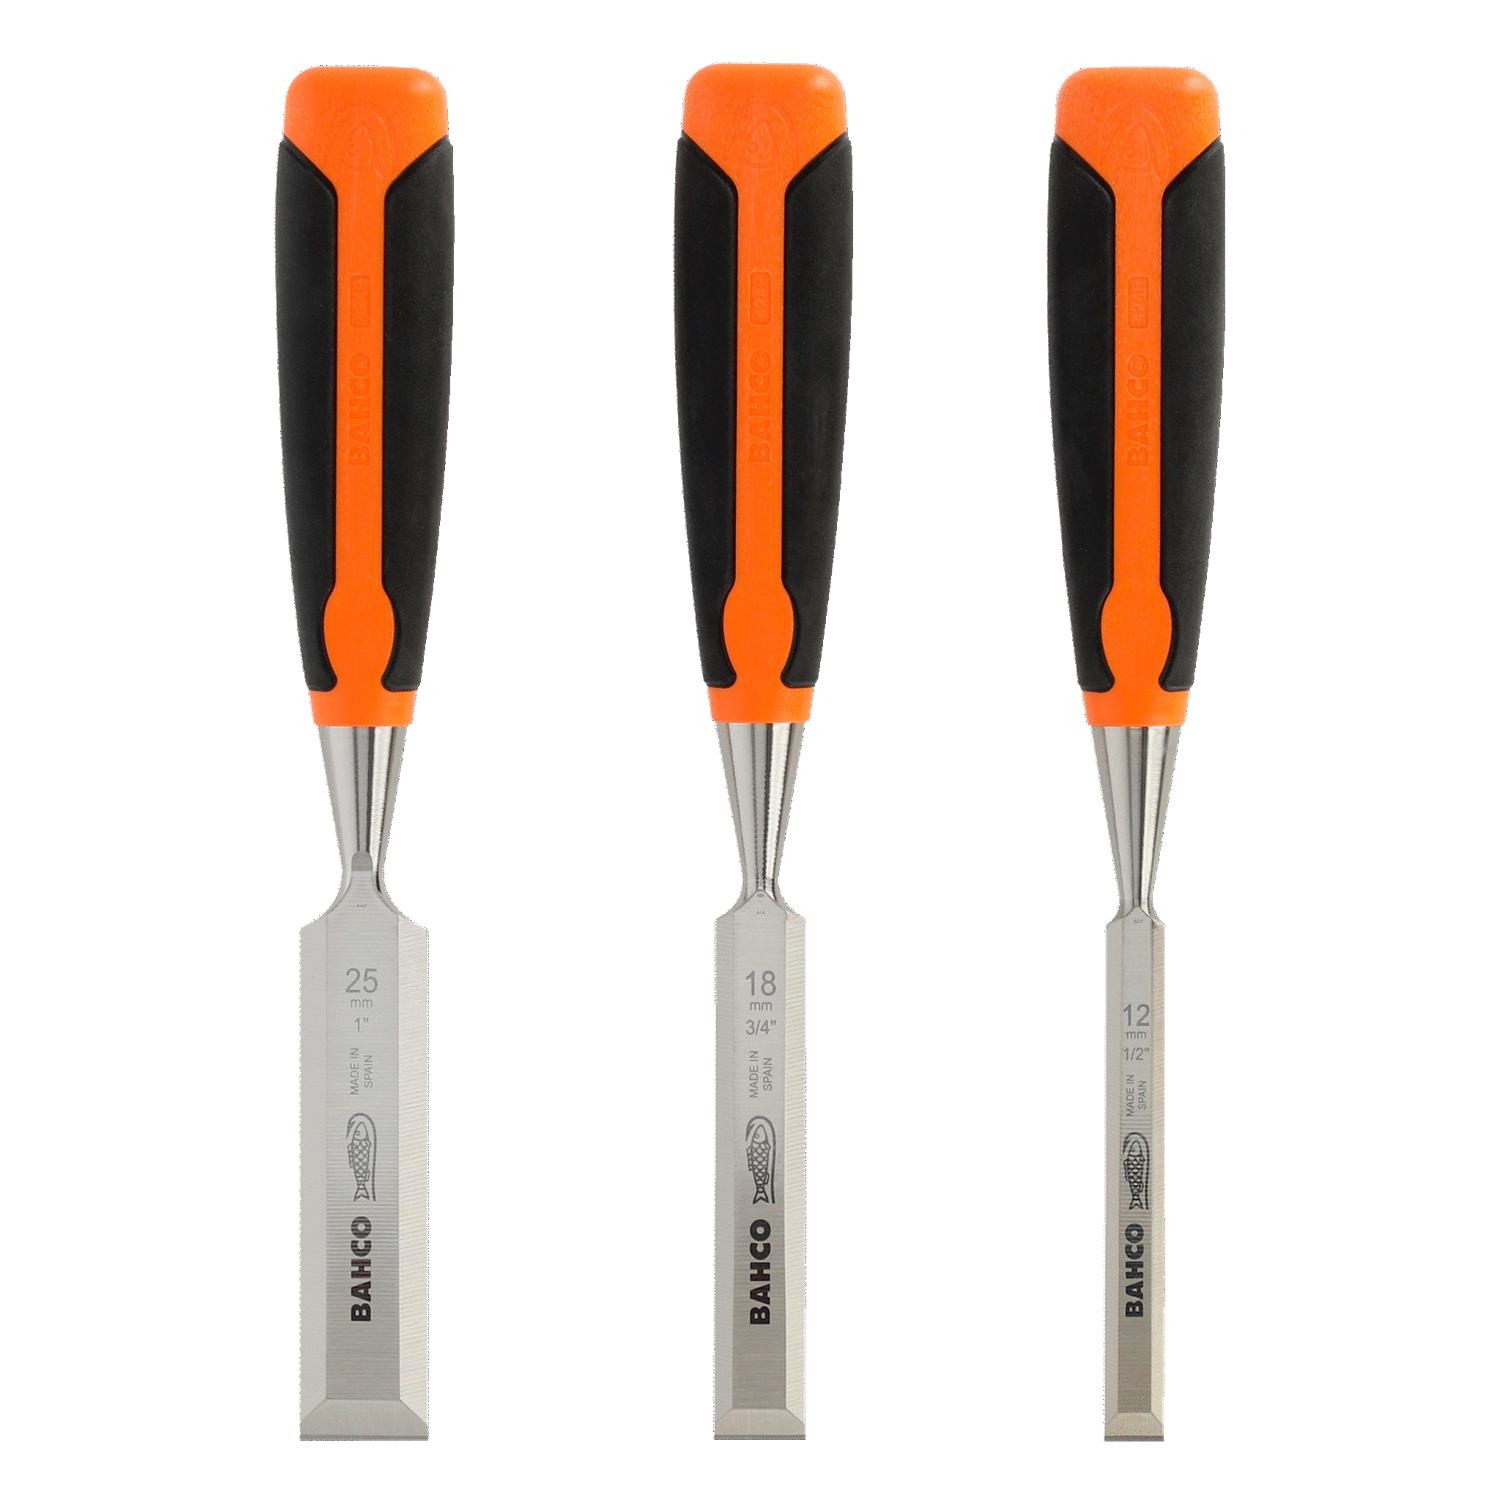 BAHCO 424P-S3-EUR Chisel Set with Rubberised Handle - 3 Pcs - Premium Chisel Set from BAHCO - Shop now at Yew Aik.